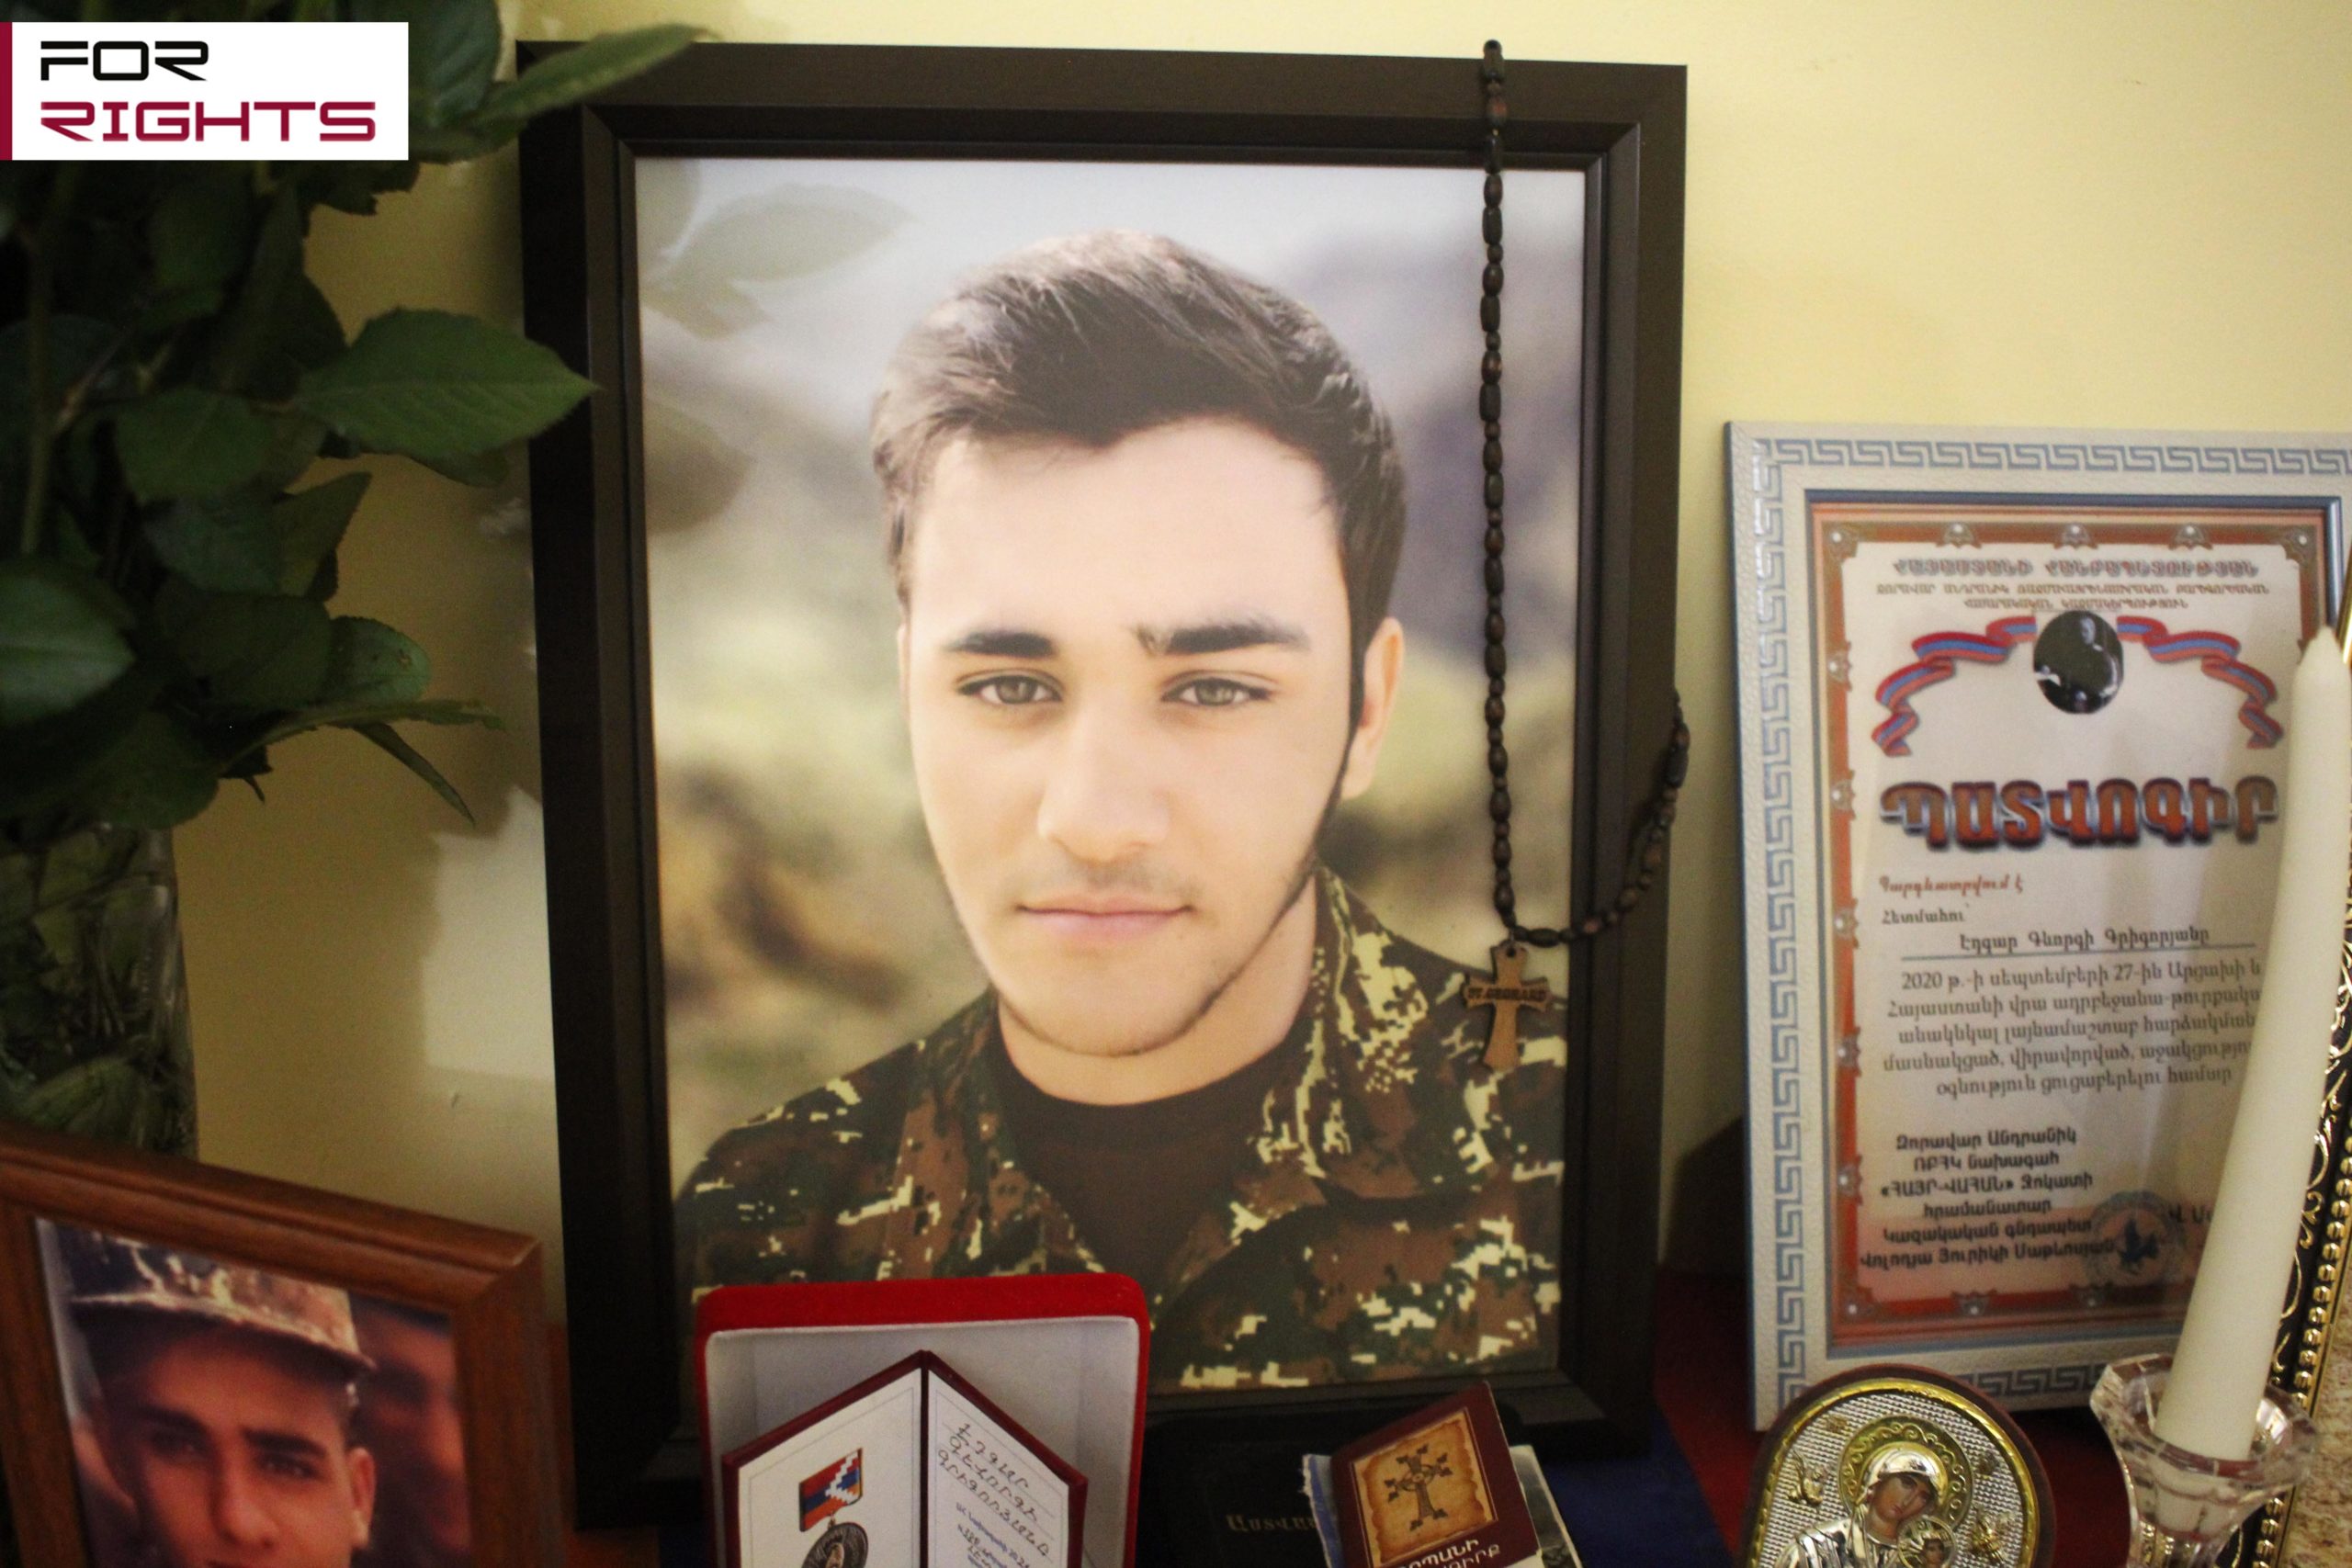 “I want my son to be given a “Combat Cross” too: he rightfully deserves it”